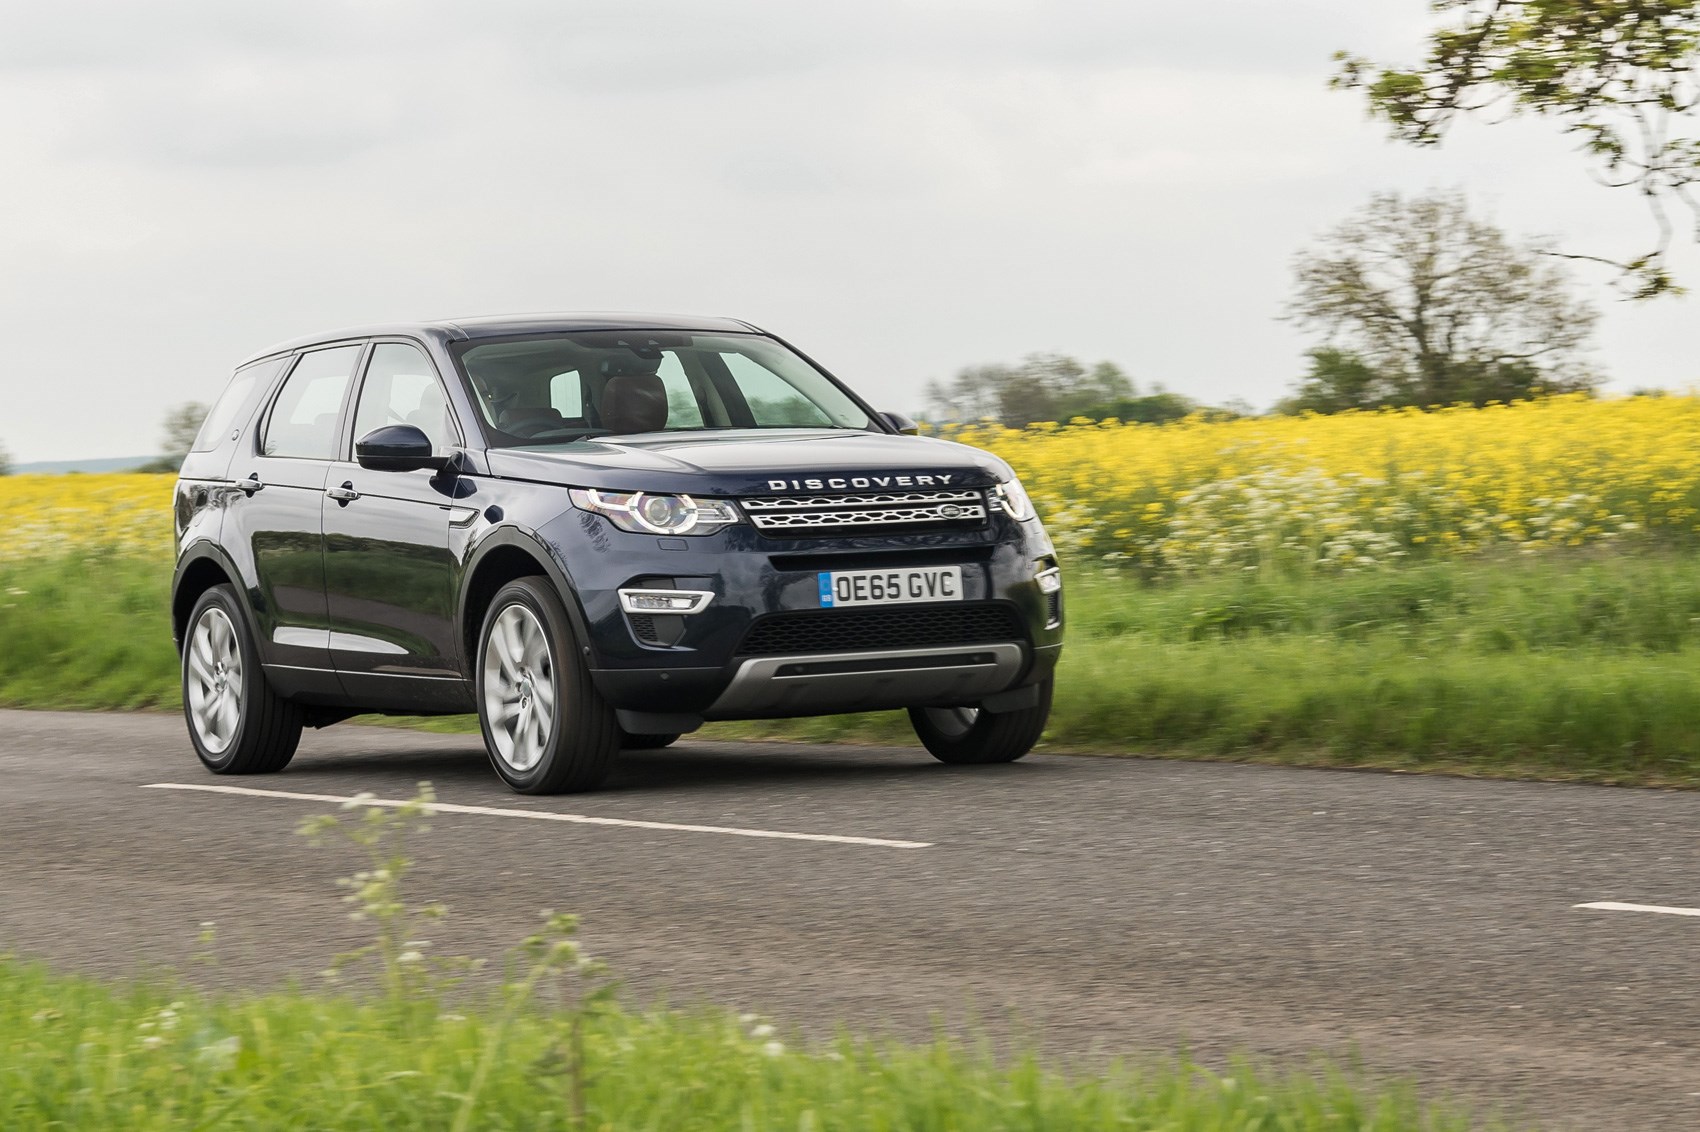 2016 Land Rover Discovery Sport Review & Ratings